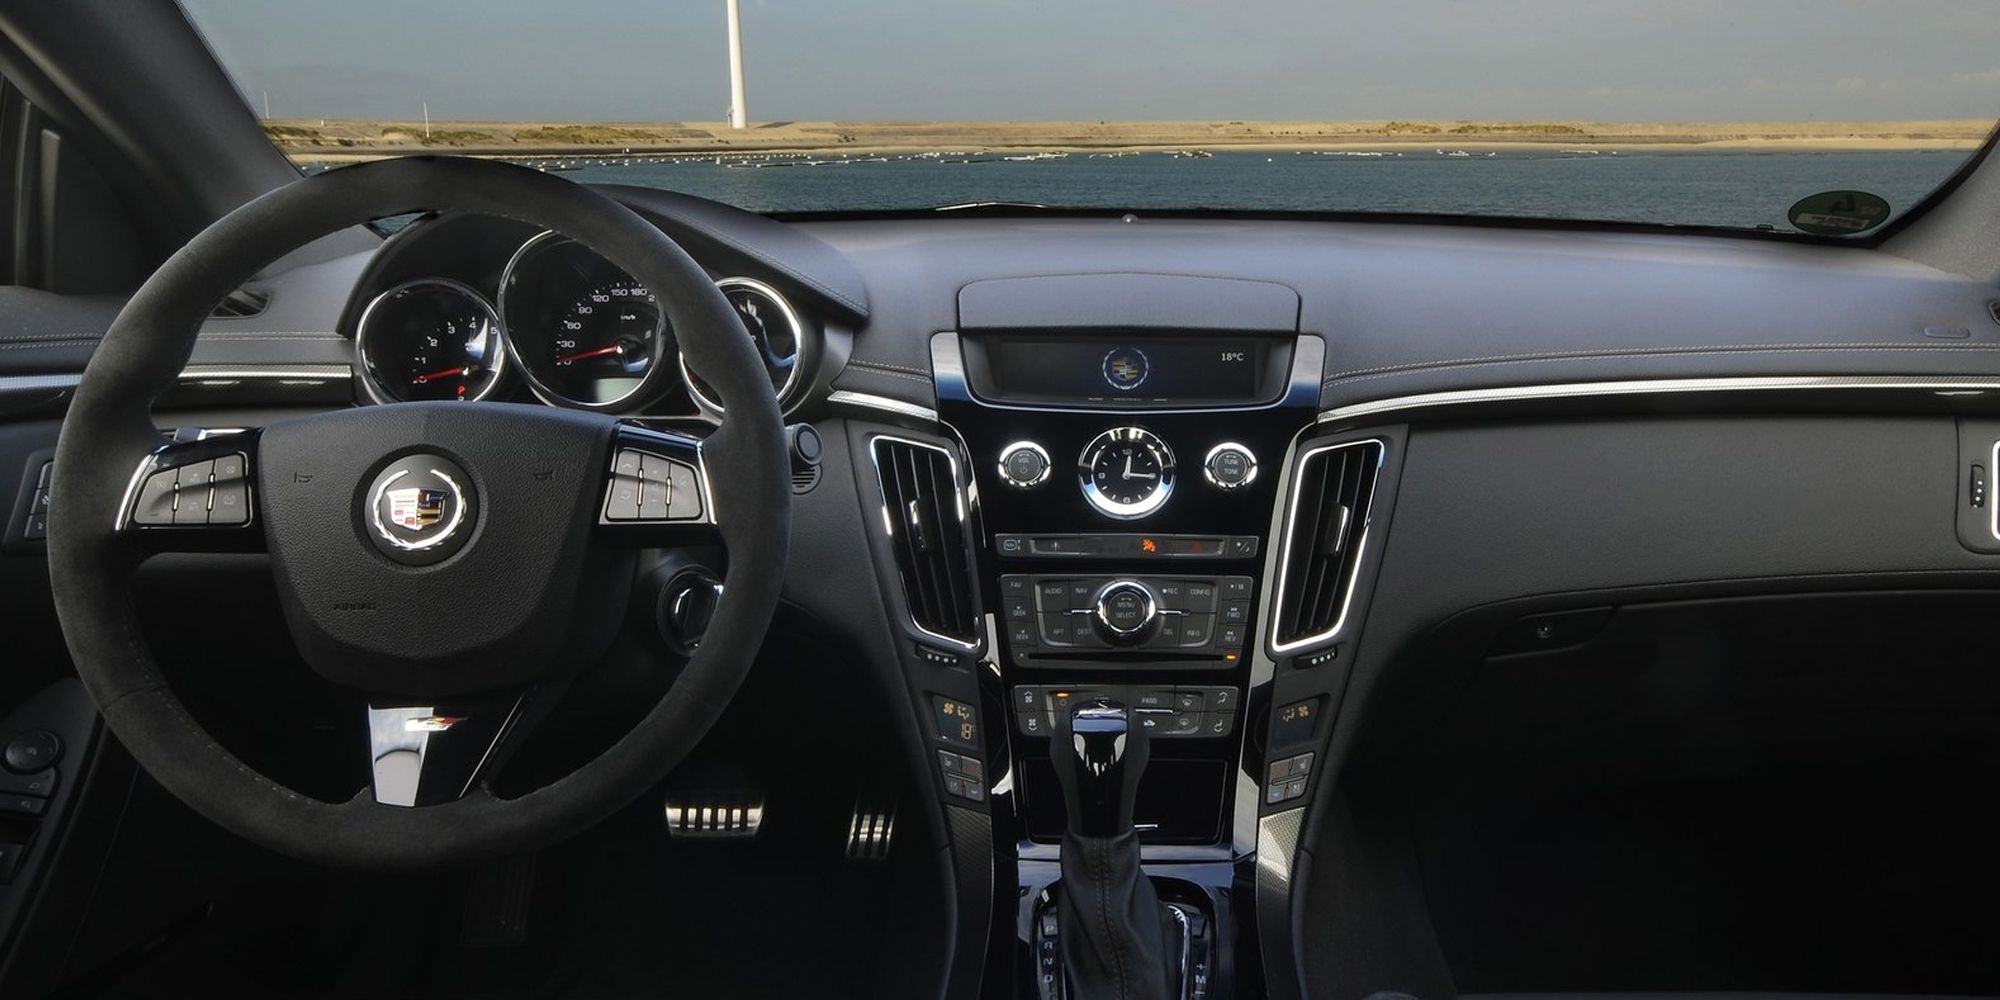 The interior of the CTS-V, manual transmission, infotainment screen down